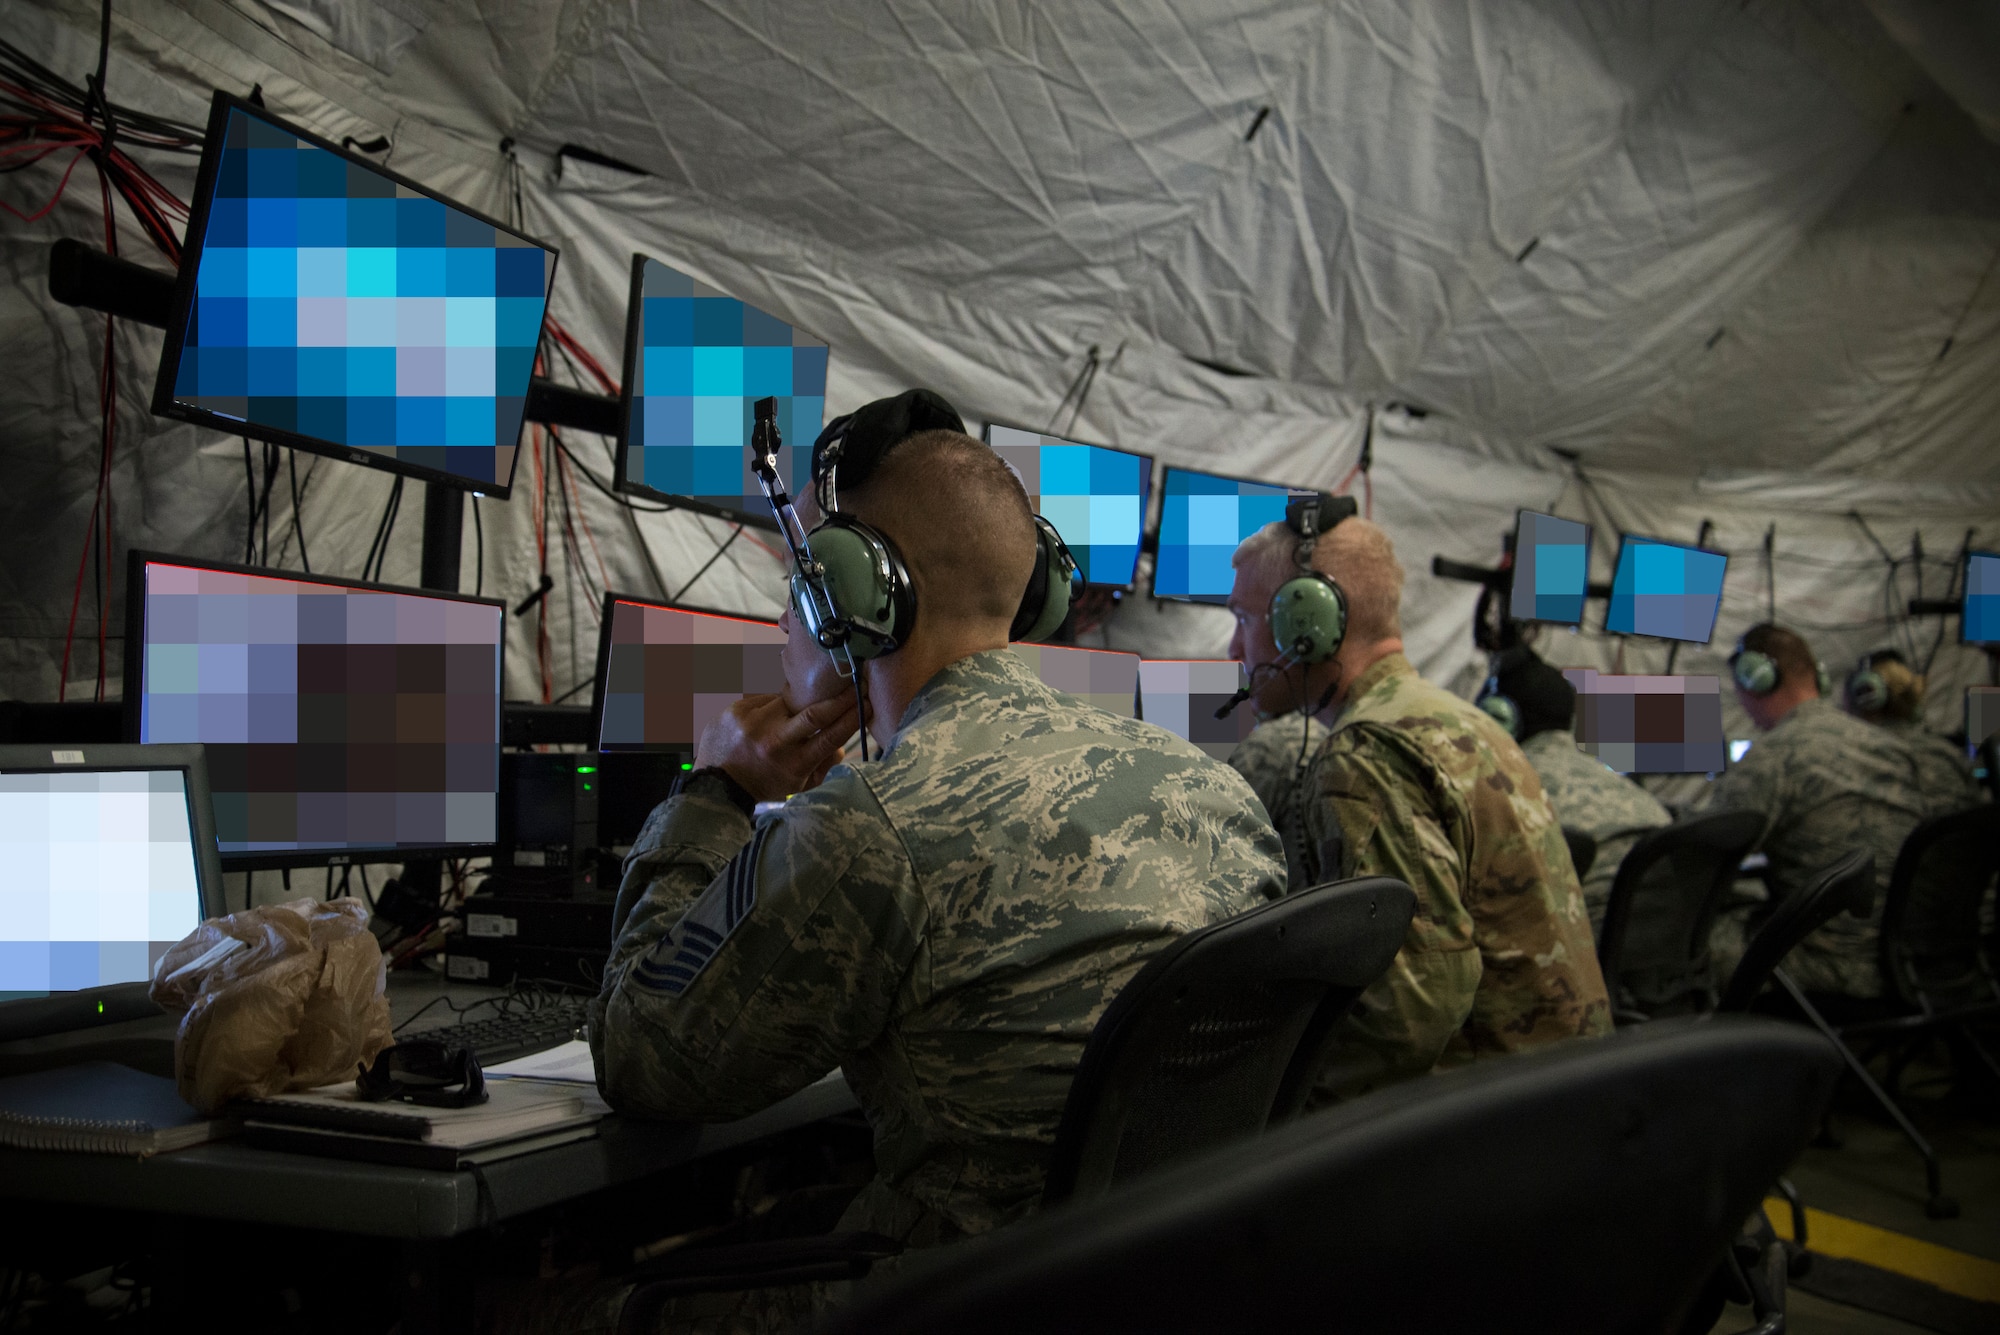 U.S. Air Force Airmen from the 726th Air Control Squadron control the airspace from inside a tactical operations center during Hardrock Exercise 19-2, July 17, 2019, at Mountain Home Air Base, Idaho. The exercise was in a simulated deployed location where the base was built from the ground up and took control of the airspace. The monitors were blurred as a security precaution. (U.S. Air Force photo by Airman 1st Class Andrew Kobialka)